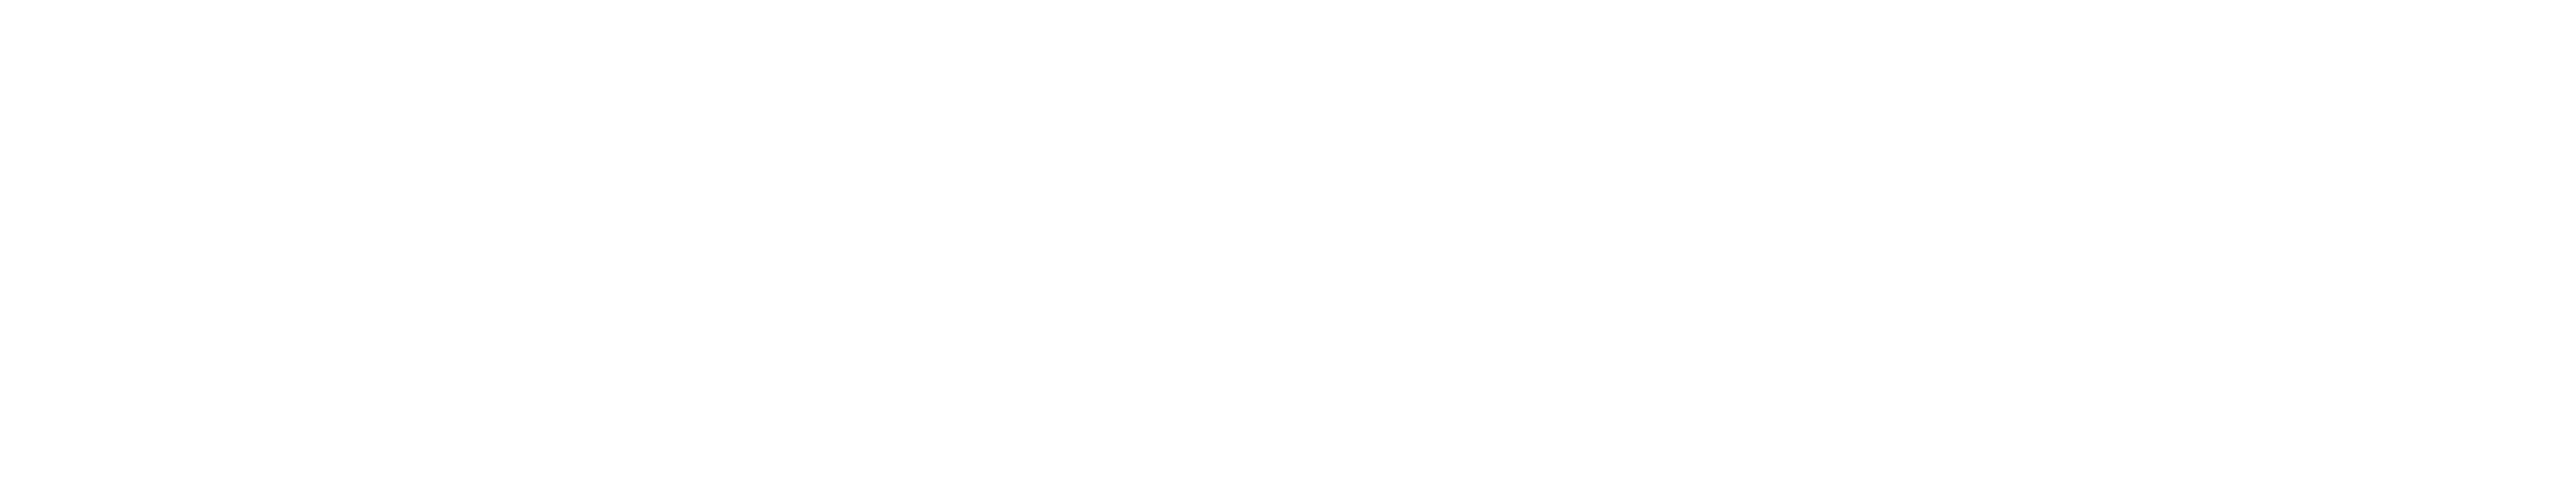 Restoration For Couples Inc.